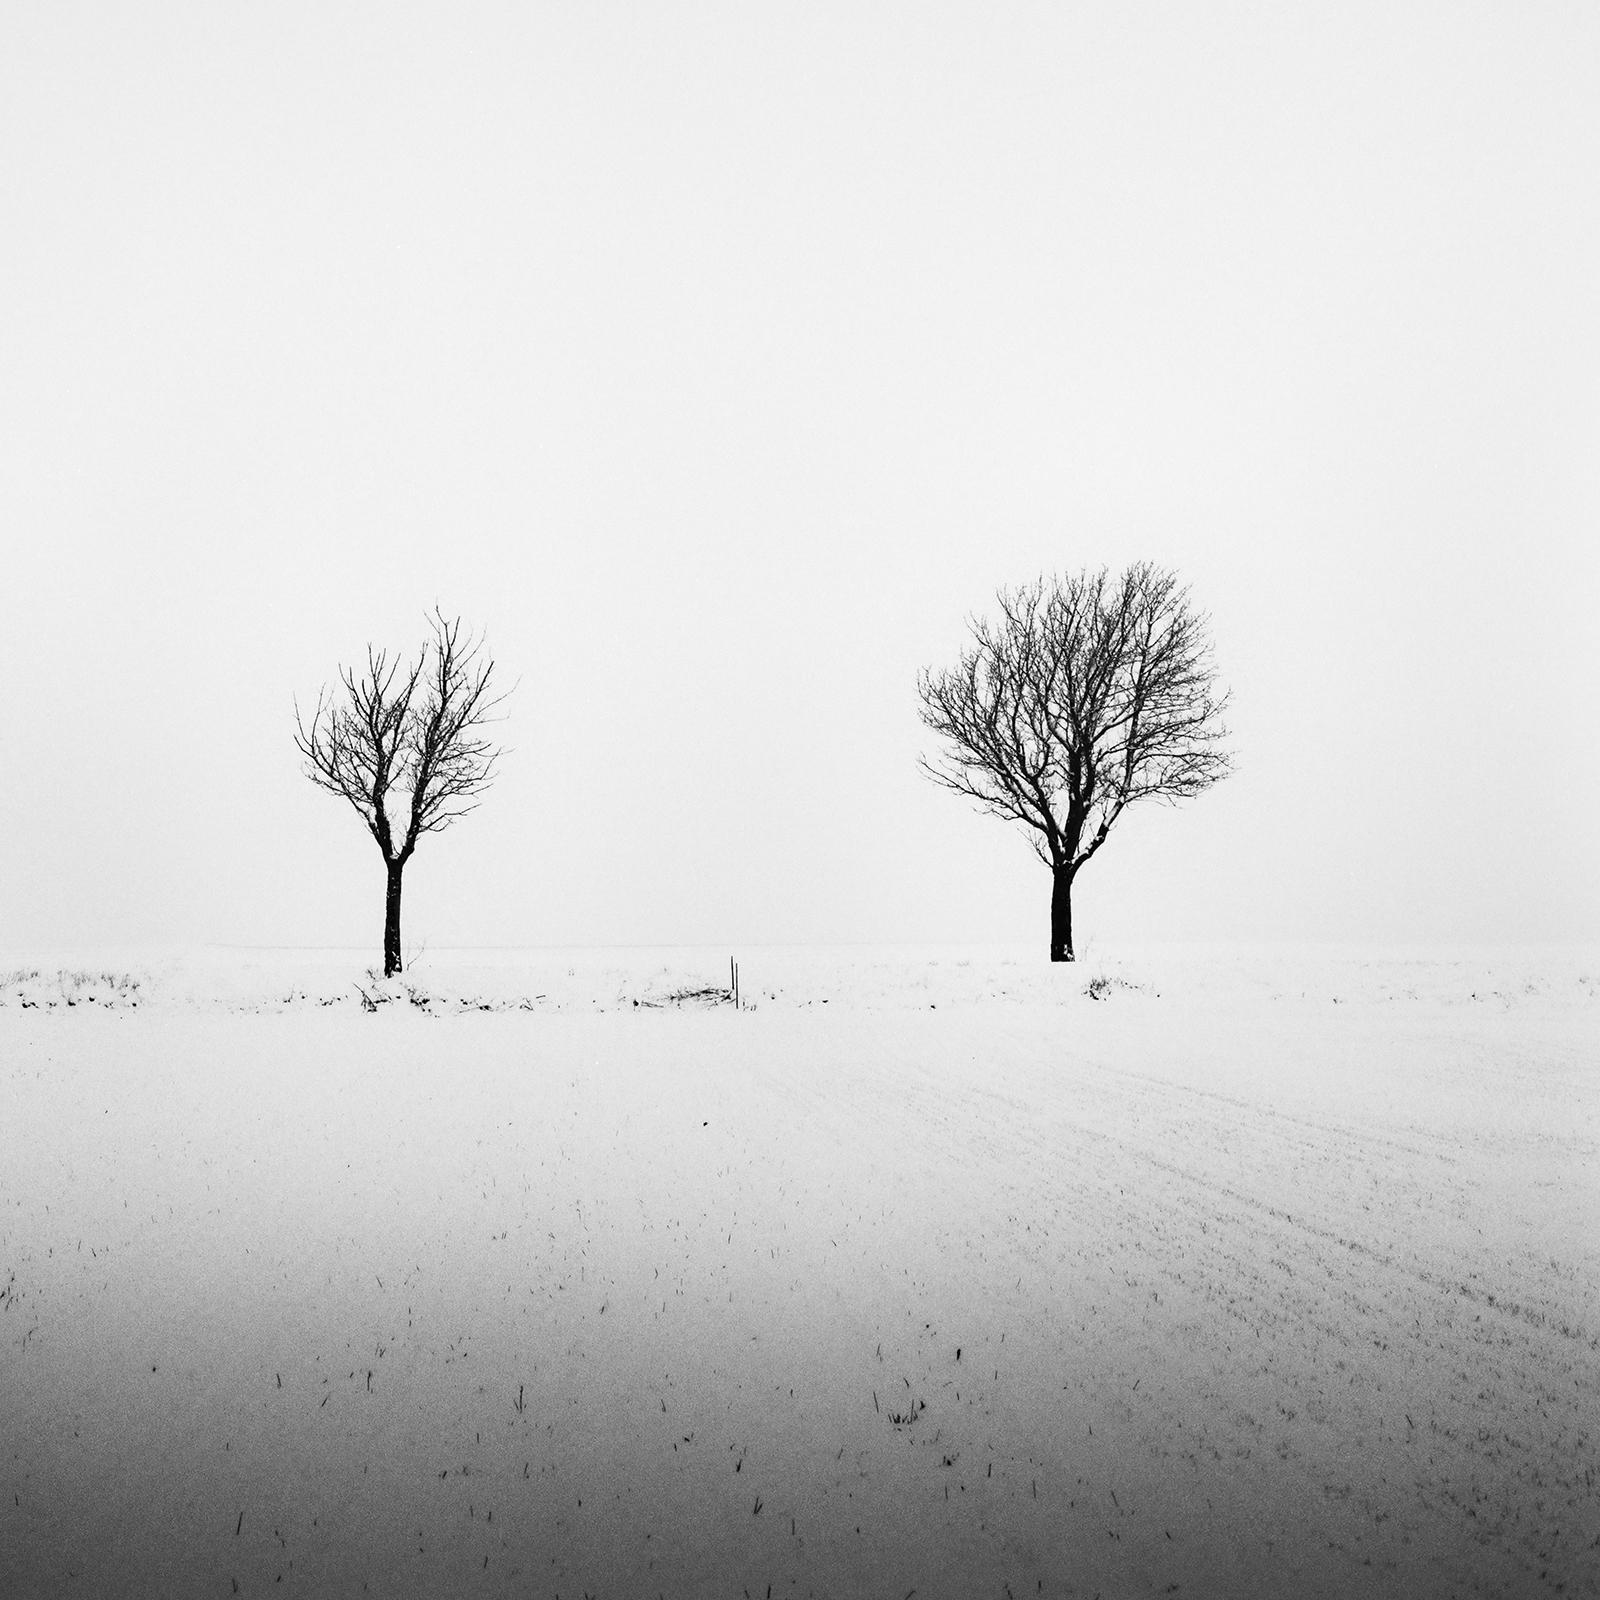 Trees in snowy Field, minimal art, black and white photography, landscape For Sale 5